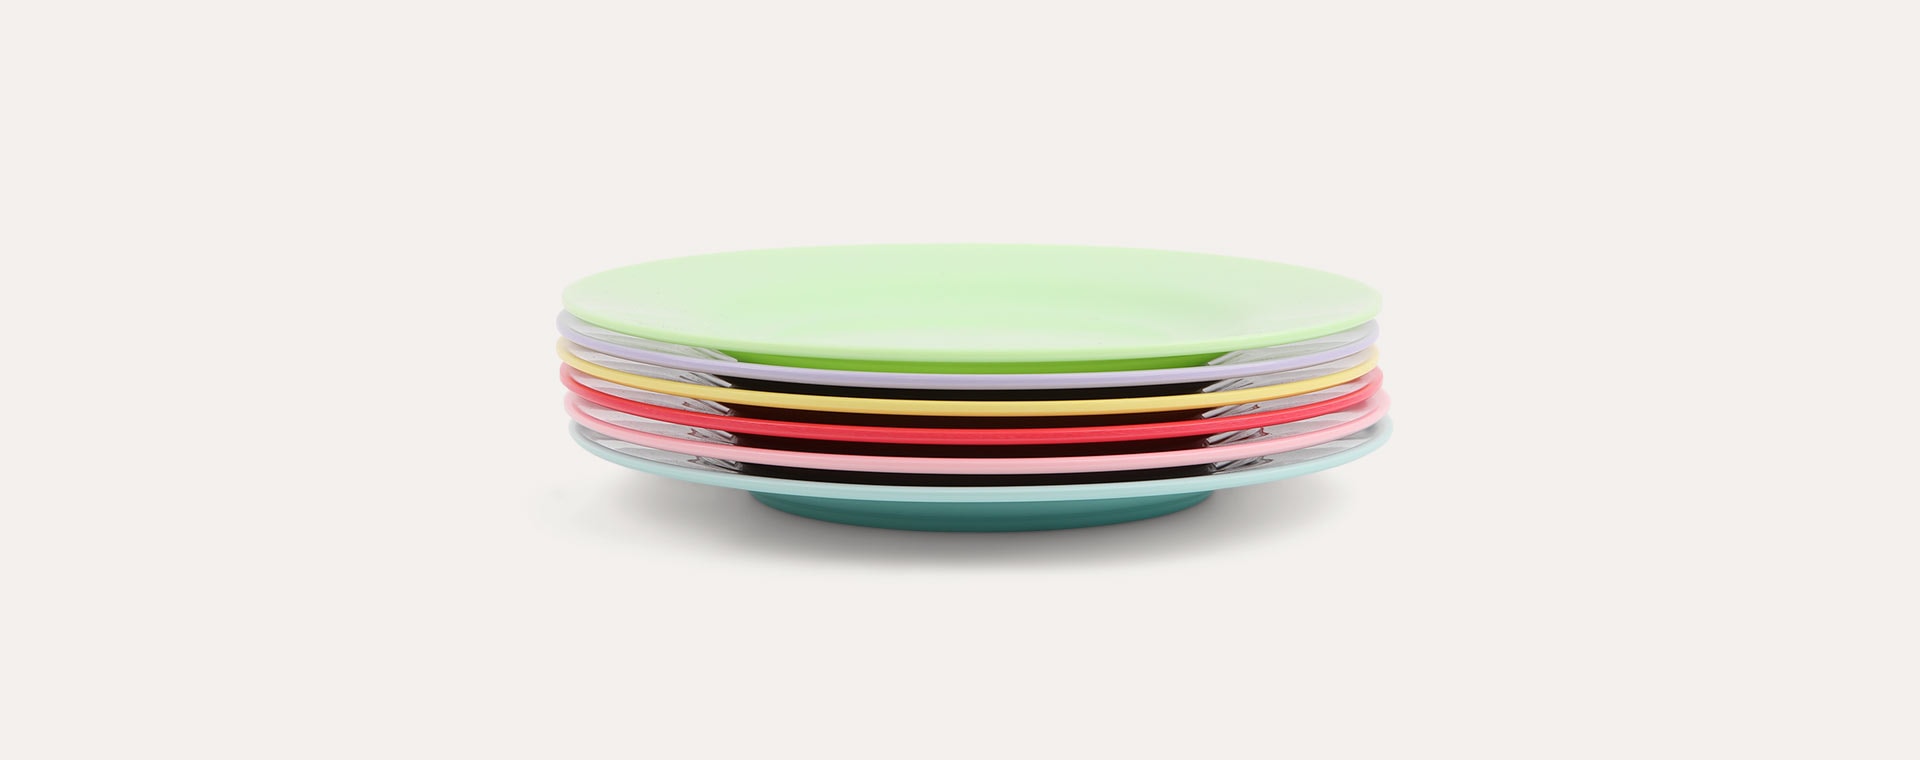 Yippie Yippie Yeah Rice 6-Pack Melamine Plates